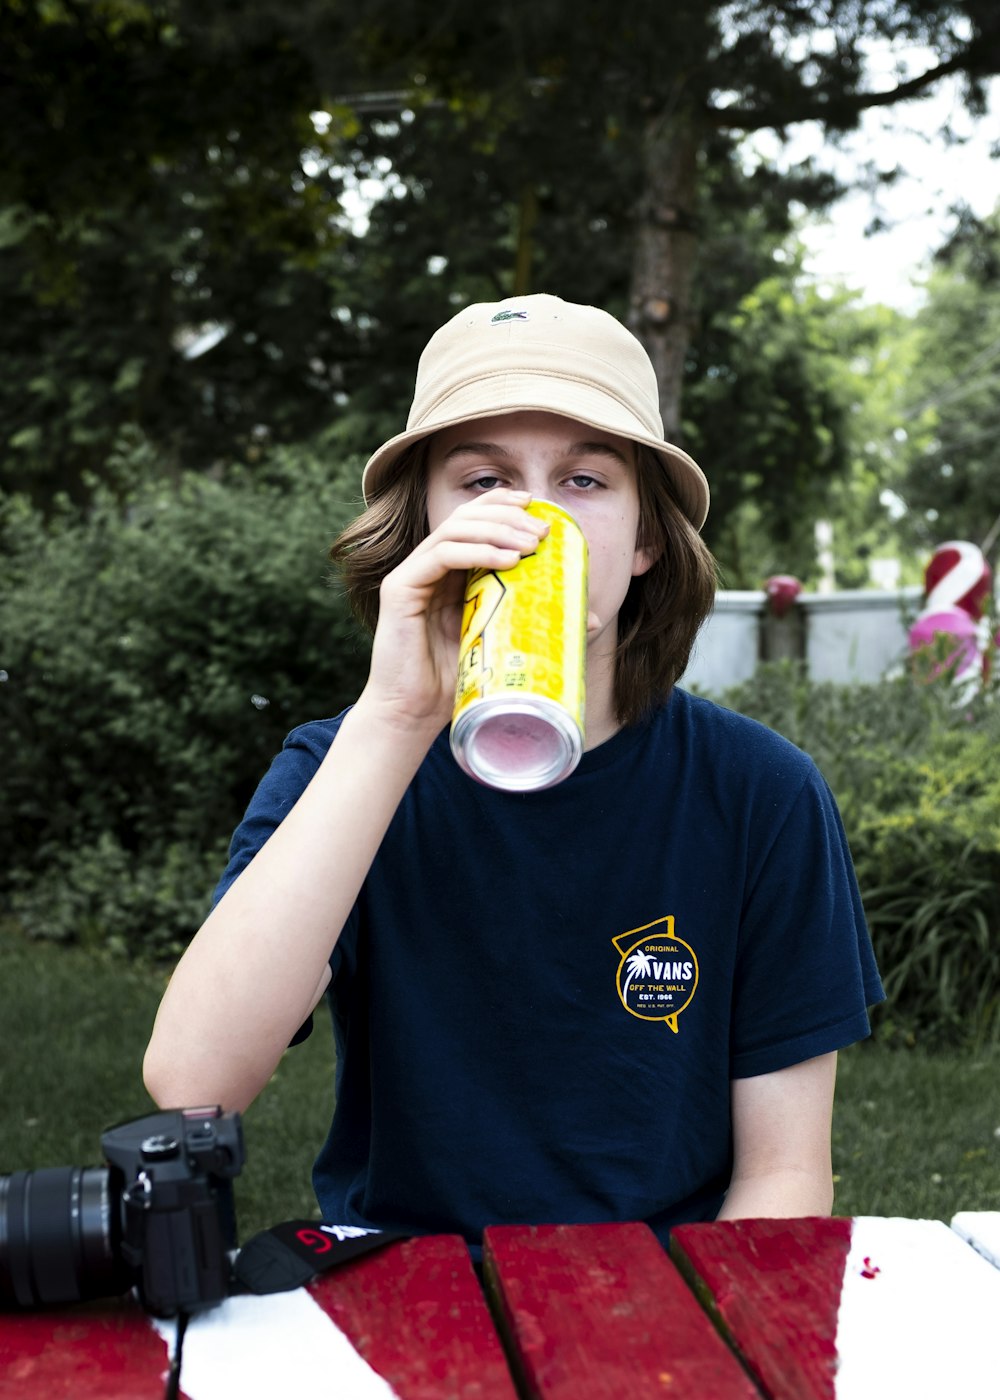 boy in blue crew neck t-shirt holding yellow and white plastic cup